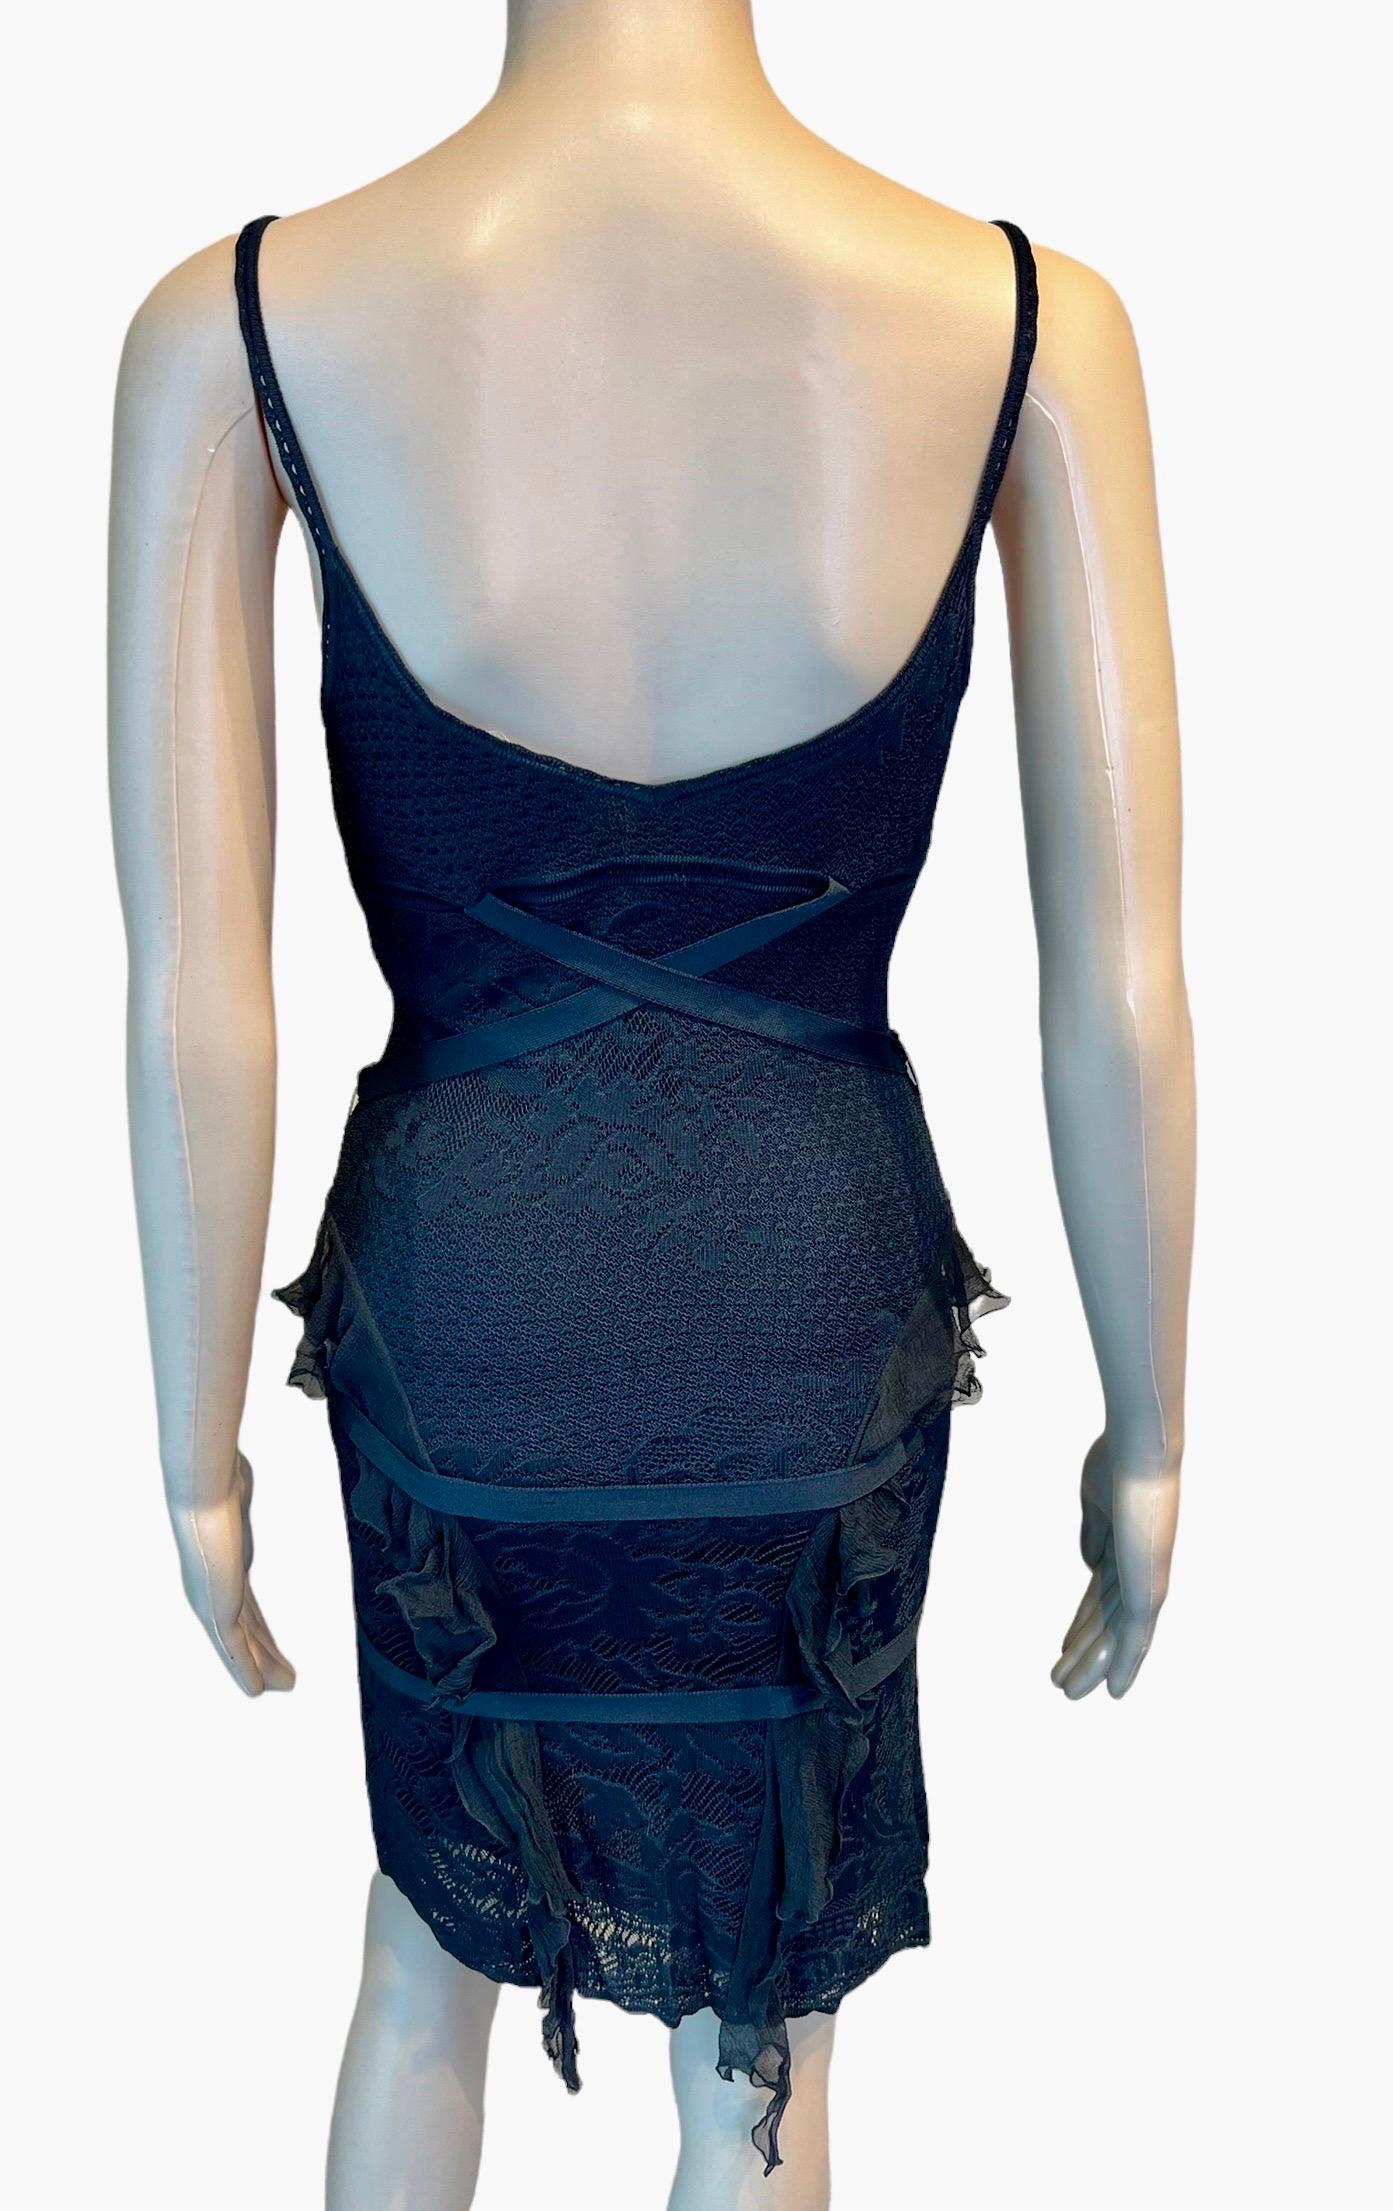 Christian Dior by John Galliano S/S 2003 Sheer Lace Bondage Knit Black Dress  For Sale 5